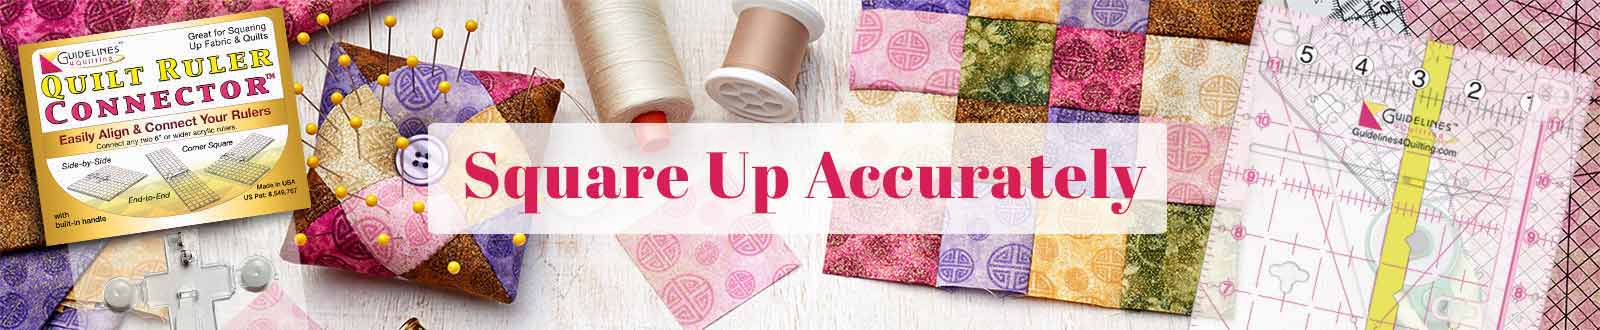 Square Up Accurately - Guidelines4Quilting